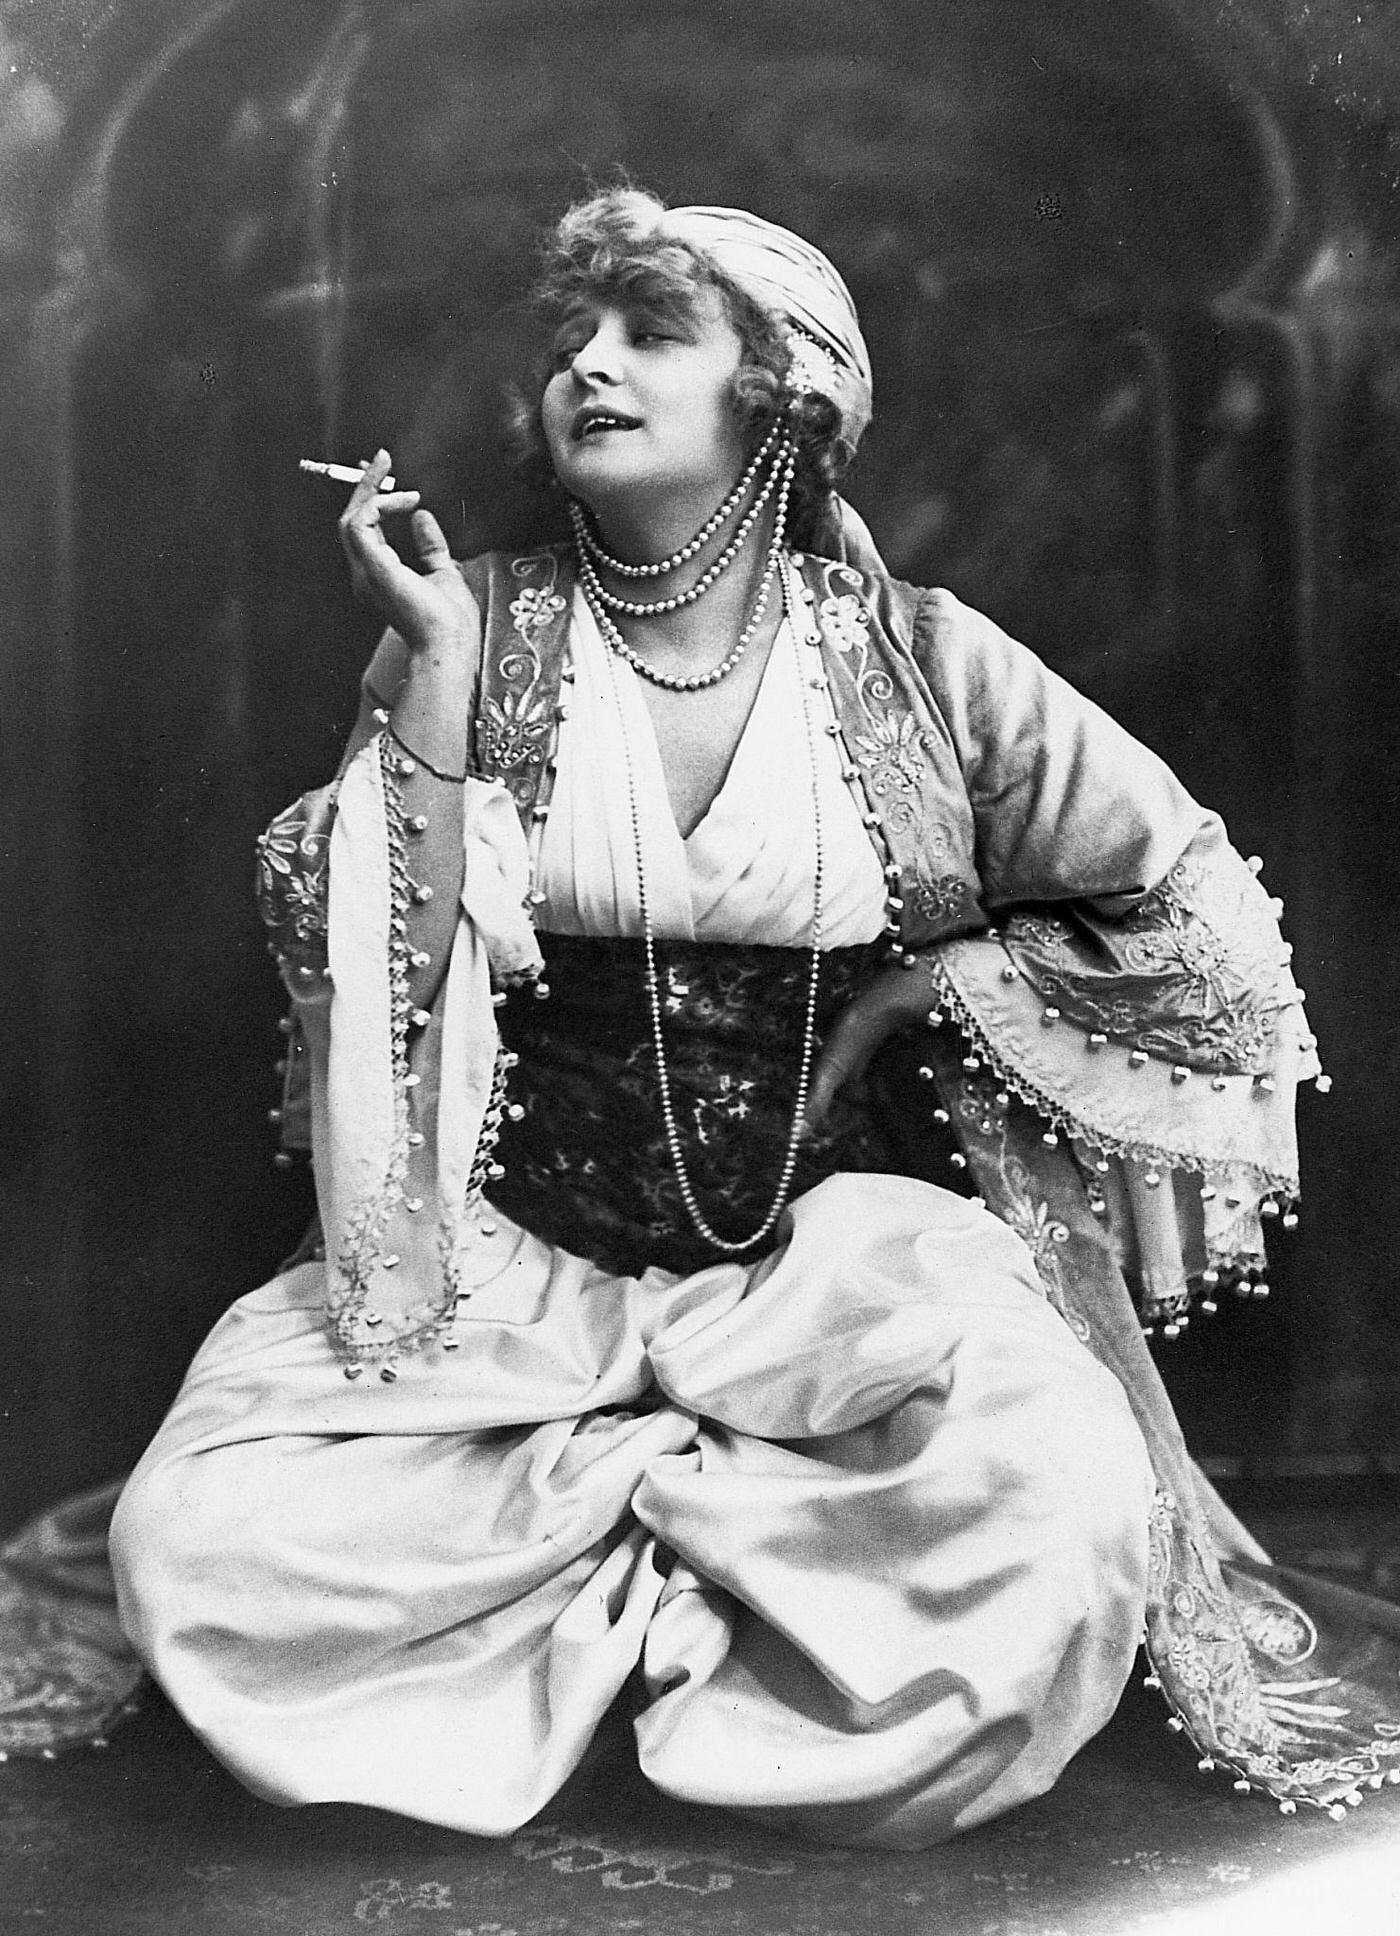 Harem lady with cigarette, 1930.